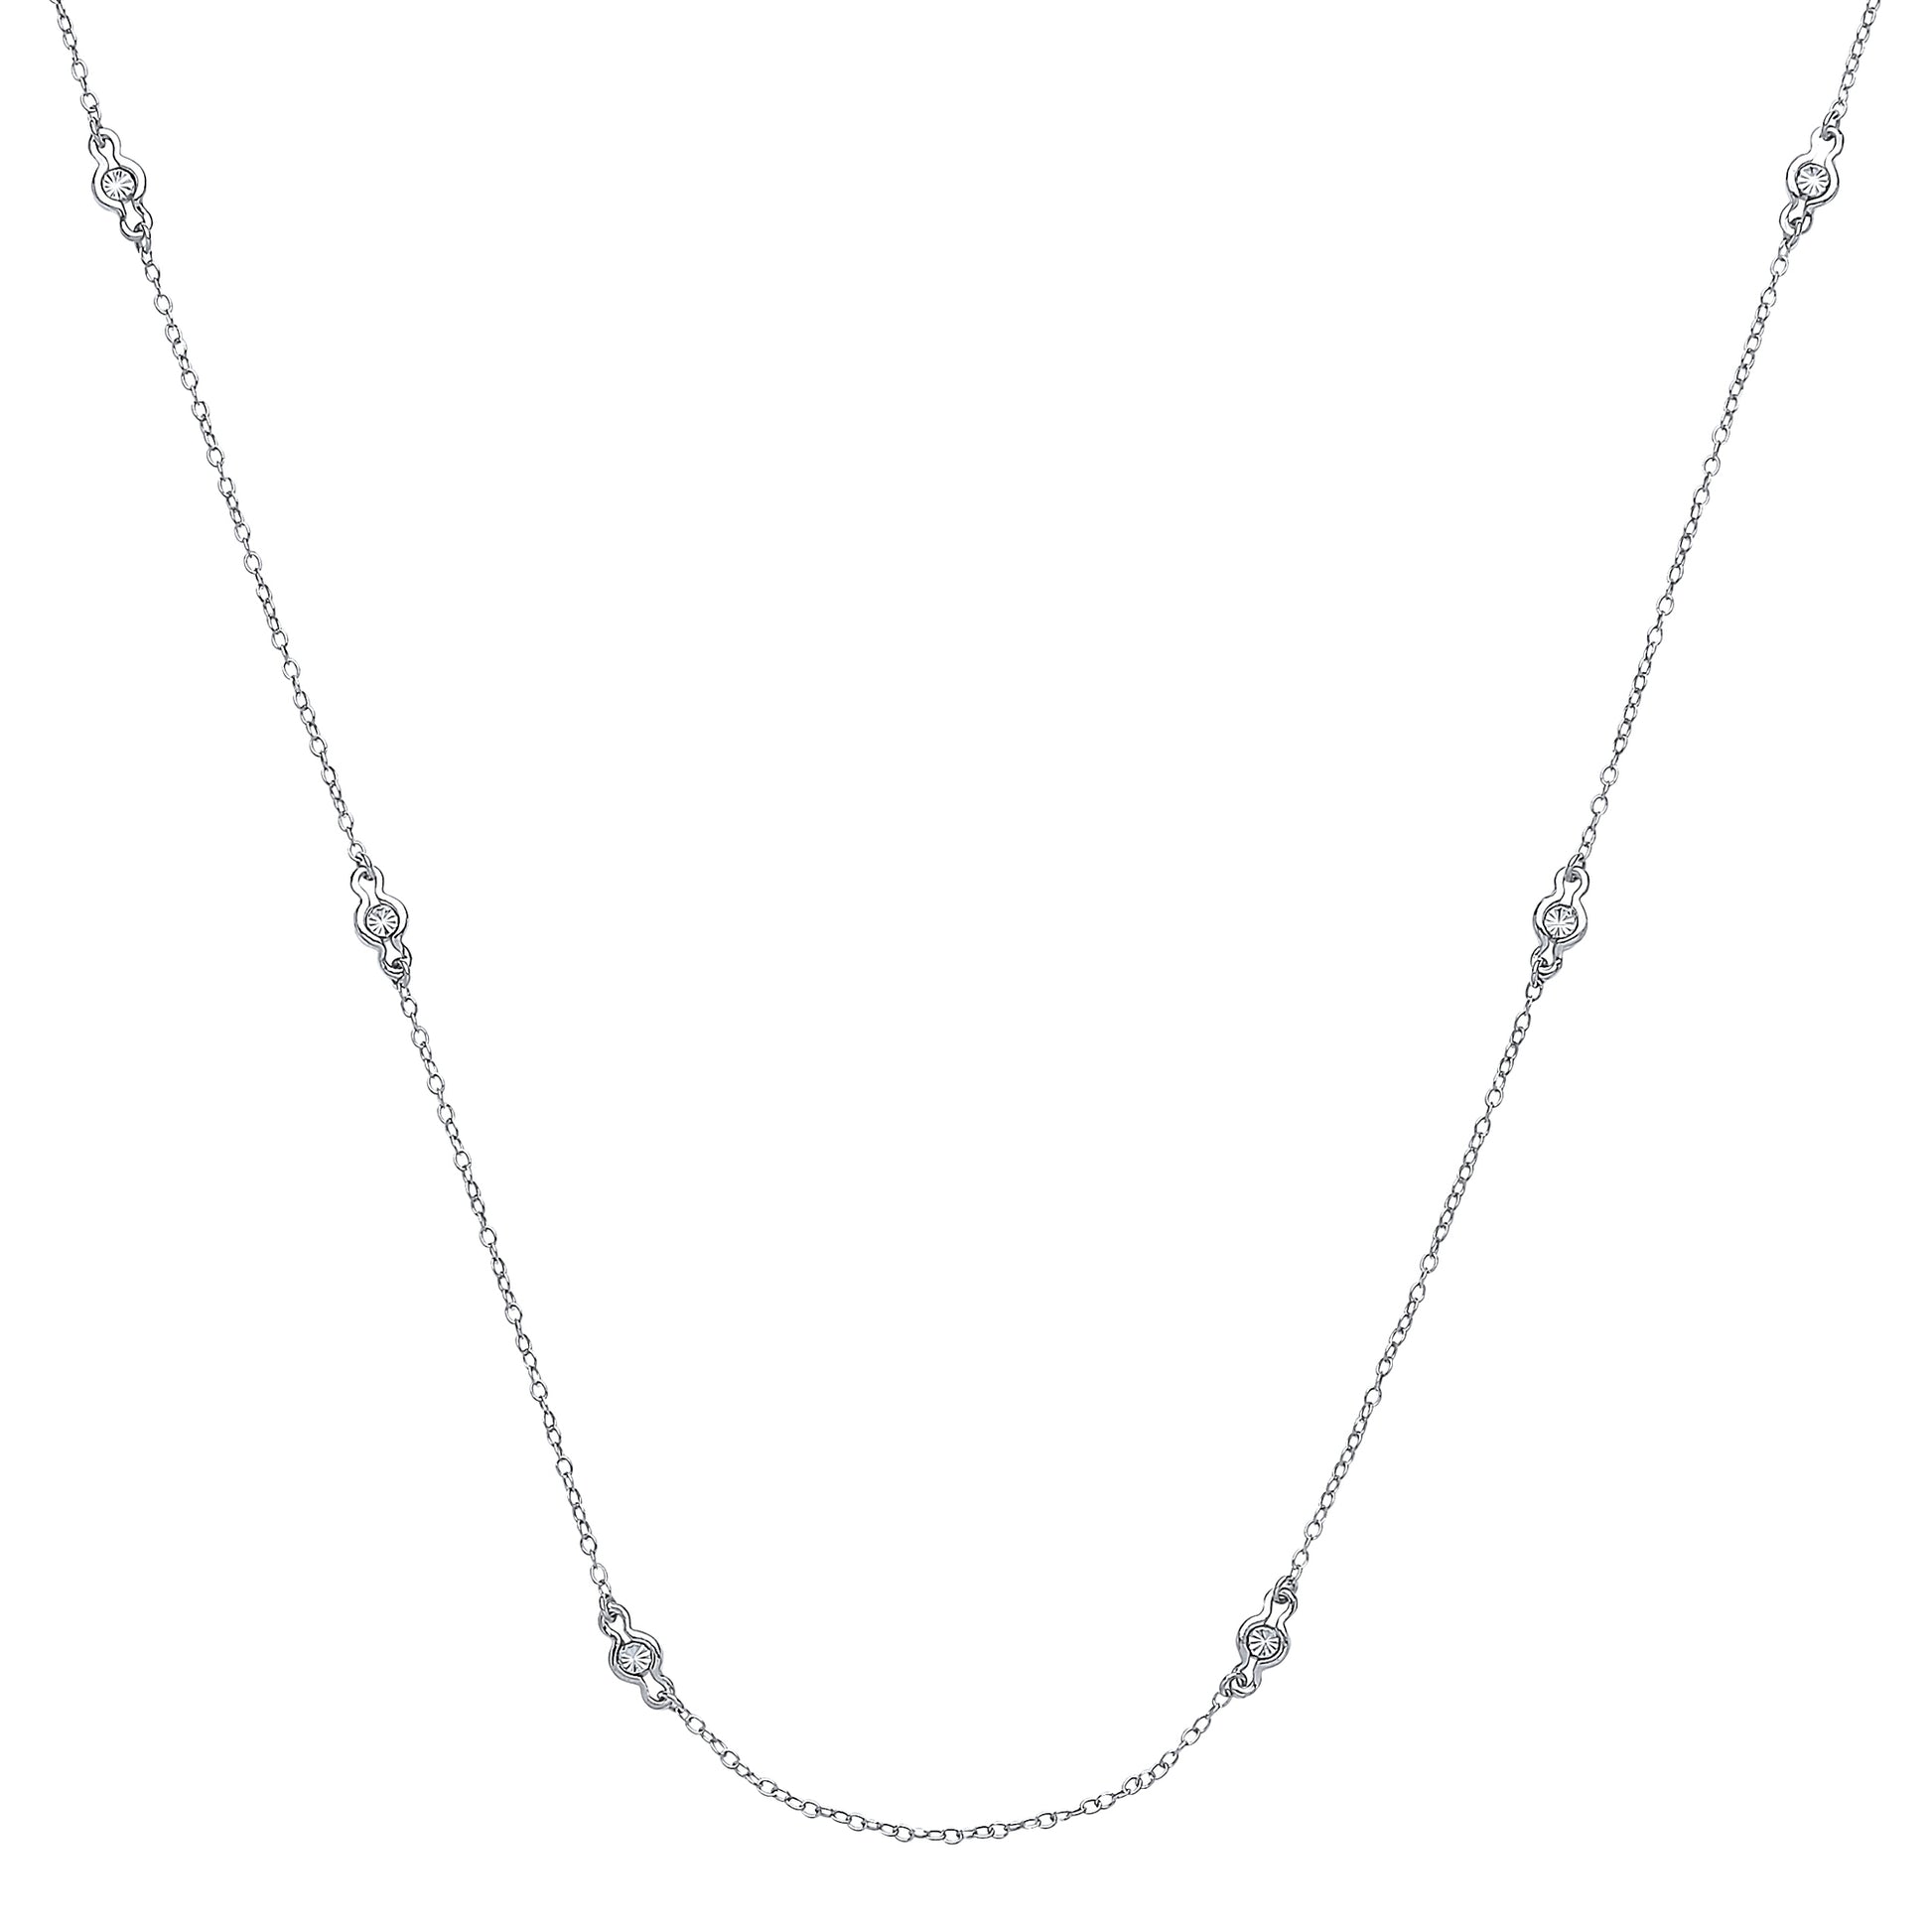 Silver  diamond-cut Faceted Illusion Eternity Necklace 36 inch - GVK178RH